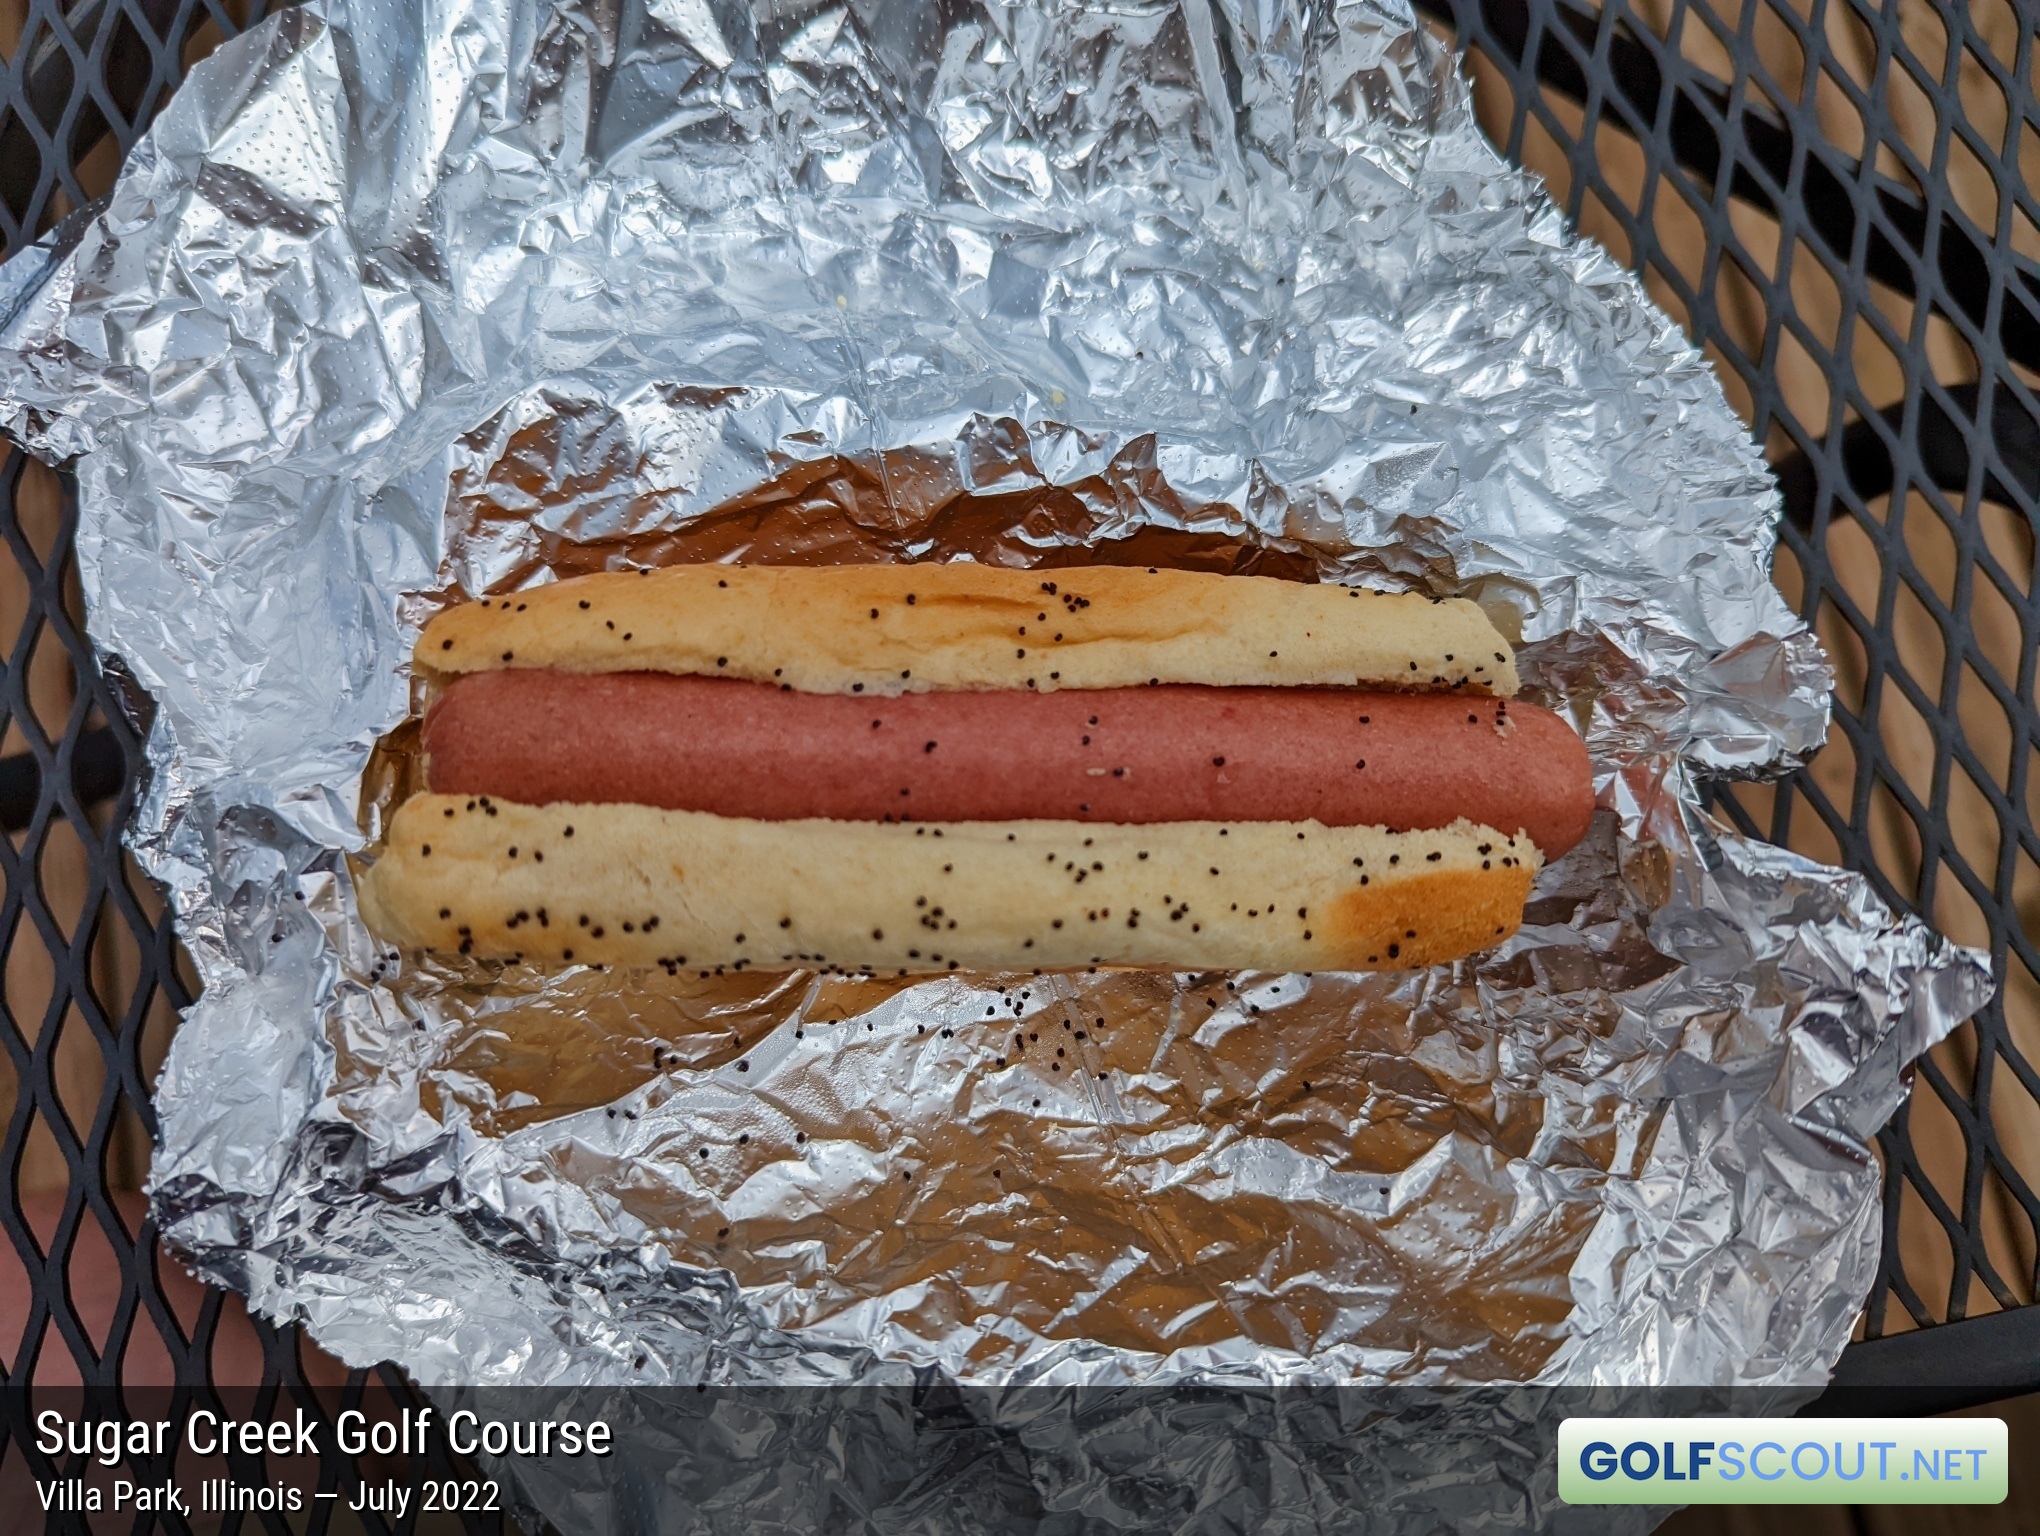 Photo of the food and dining at Sugar Creek Golf Course in Villa Park, Illinois. Photo of the hot dog at Sugar Creek Golf Course in Villa Park, Illinois.